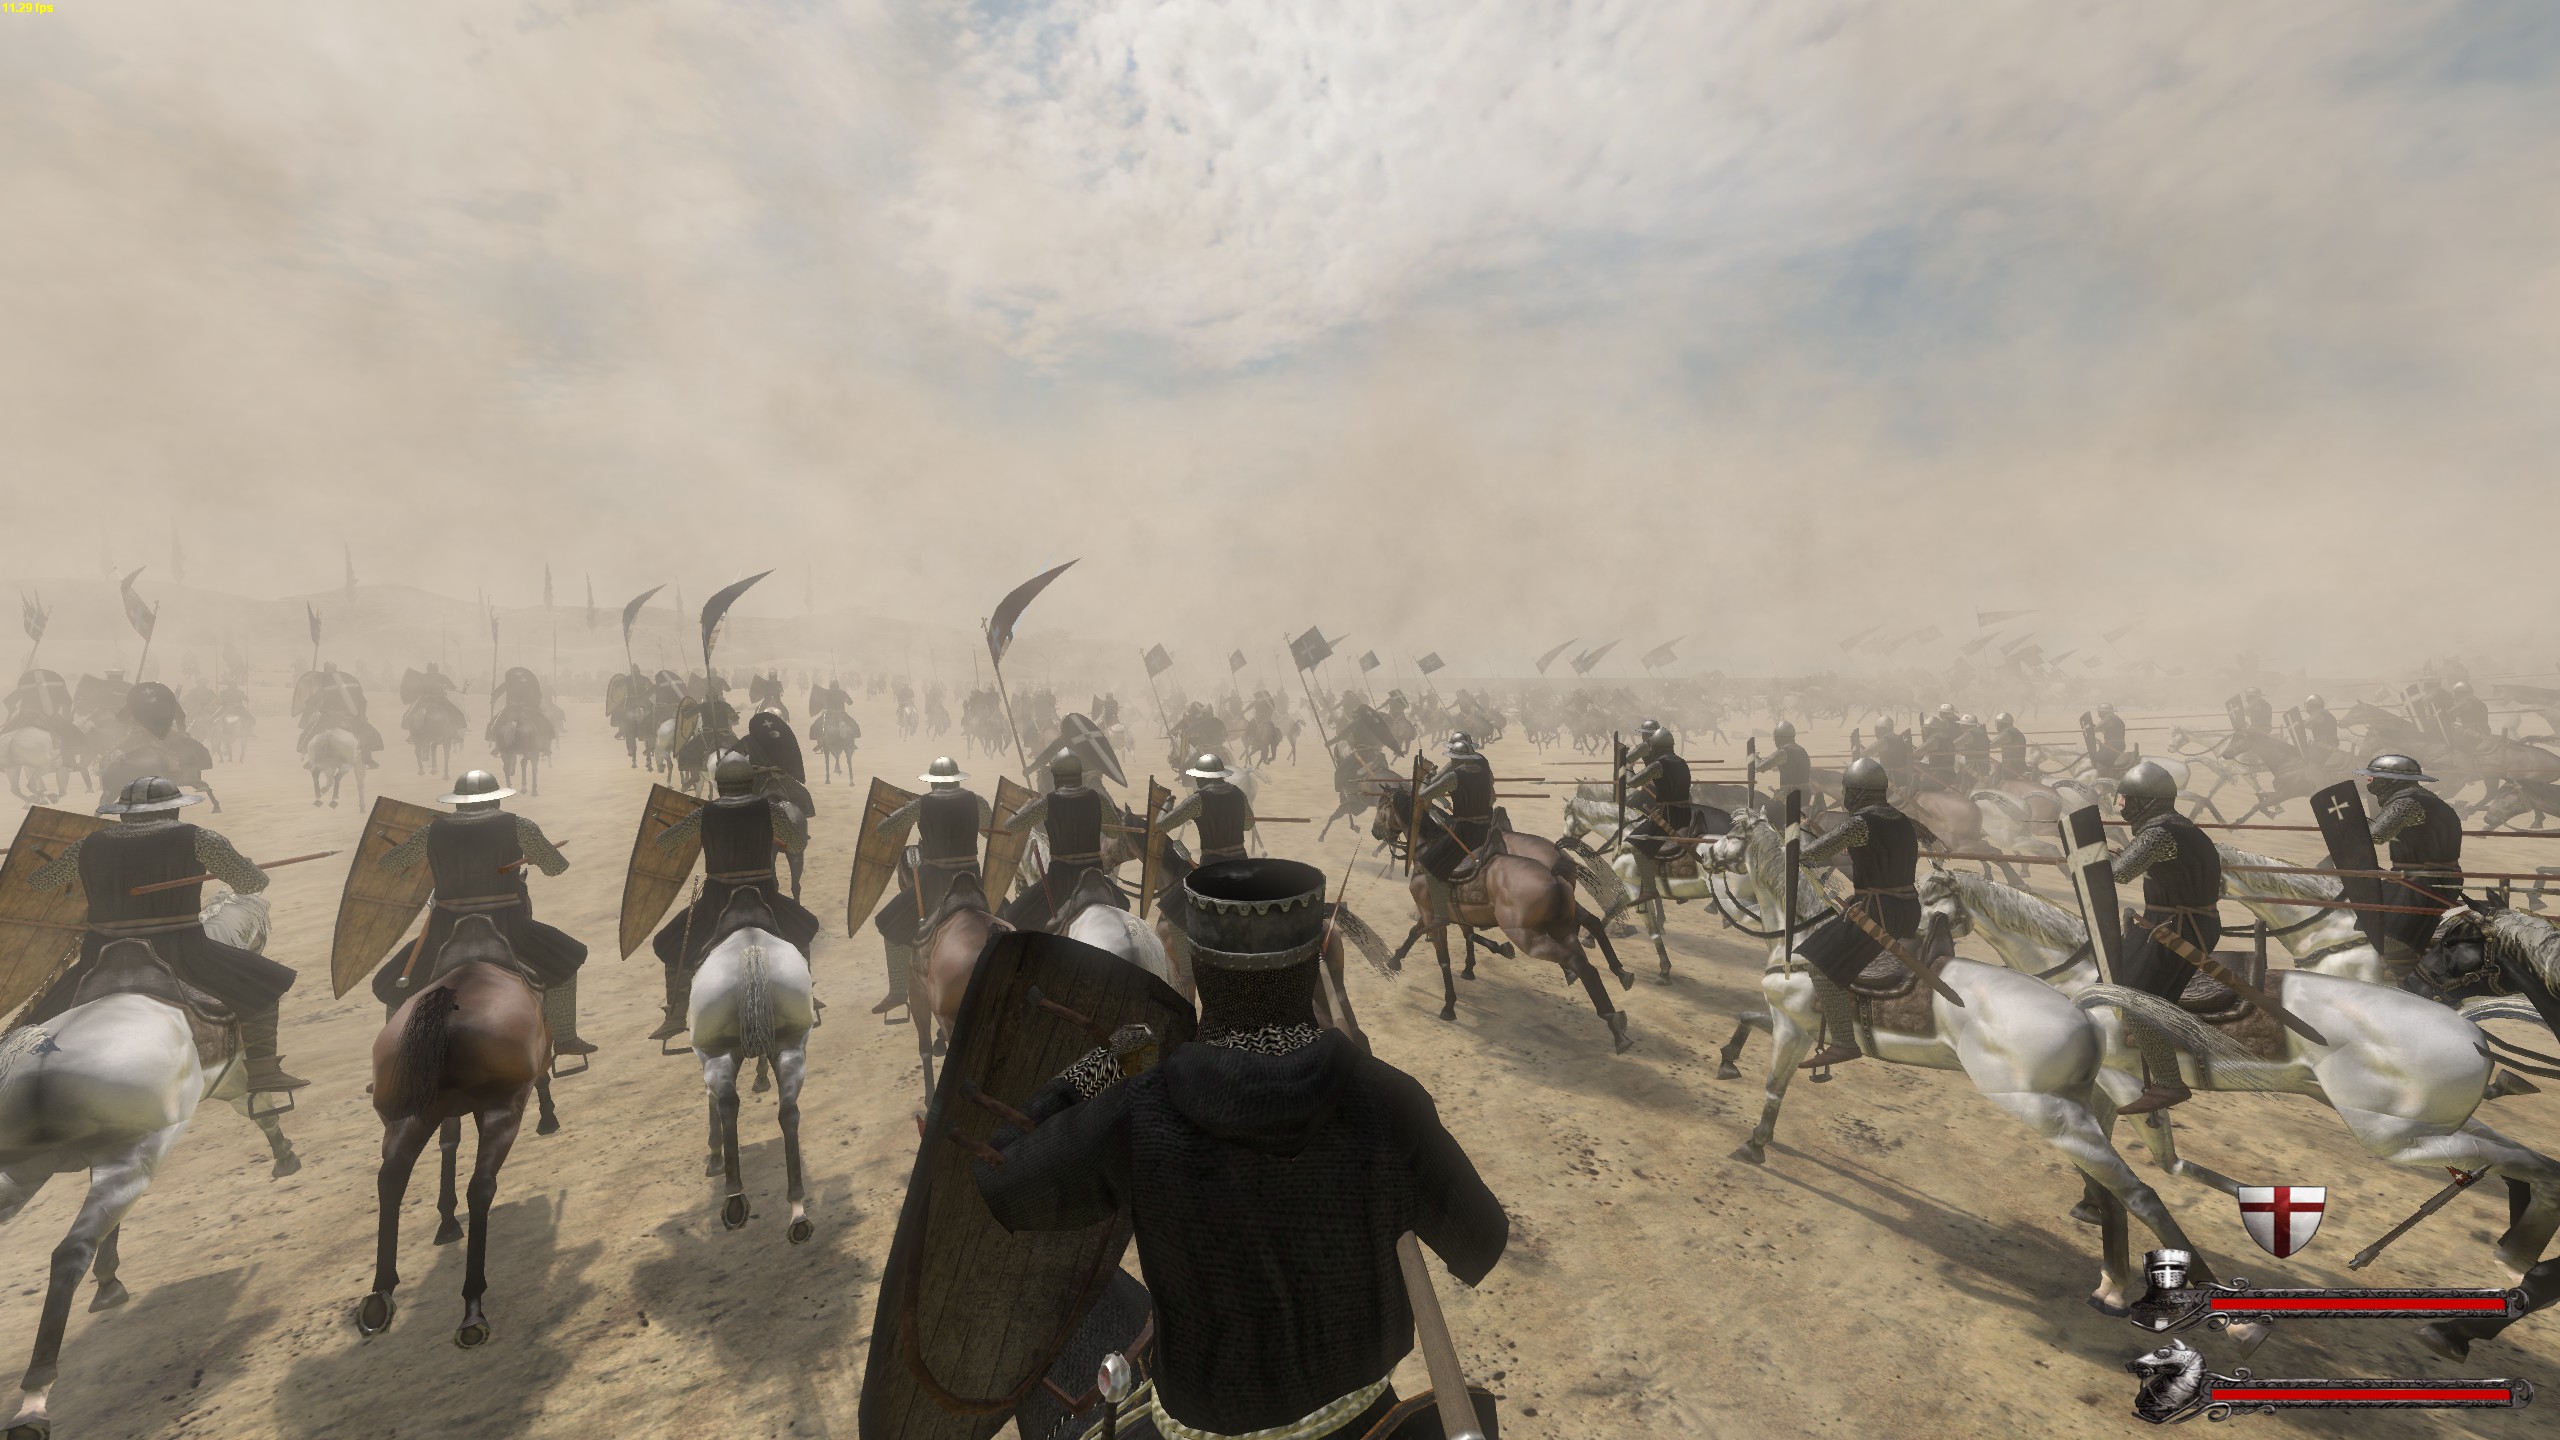 steam change mount and blade warband version